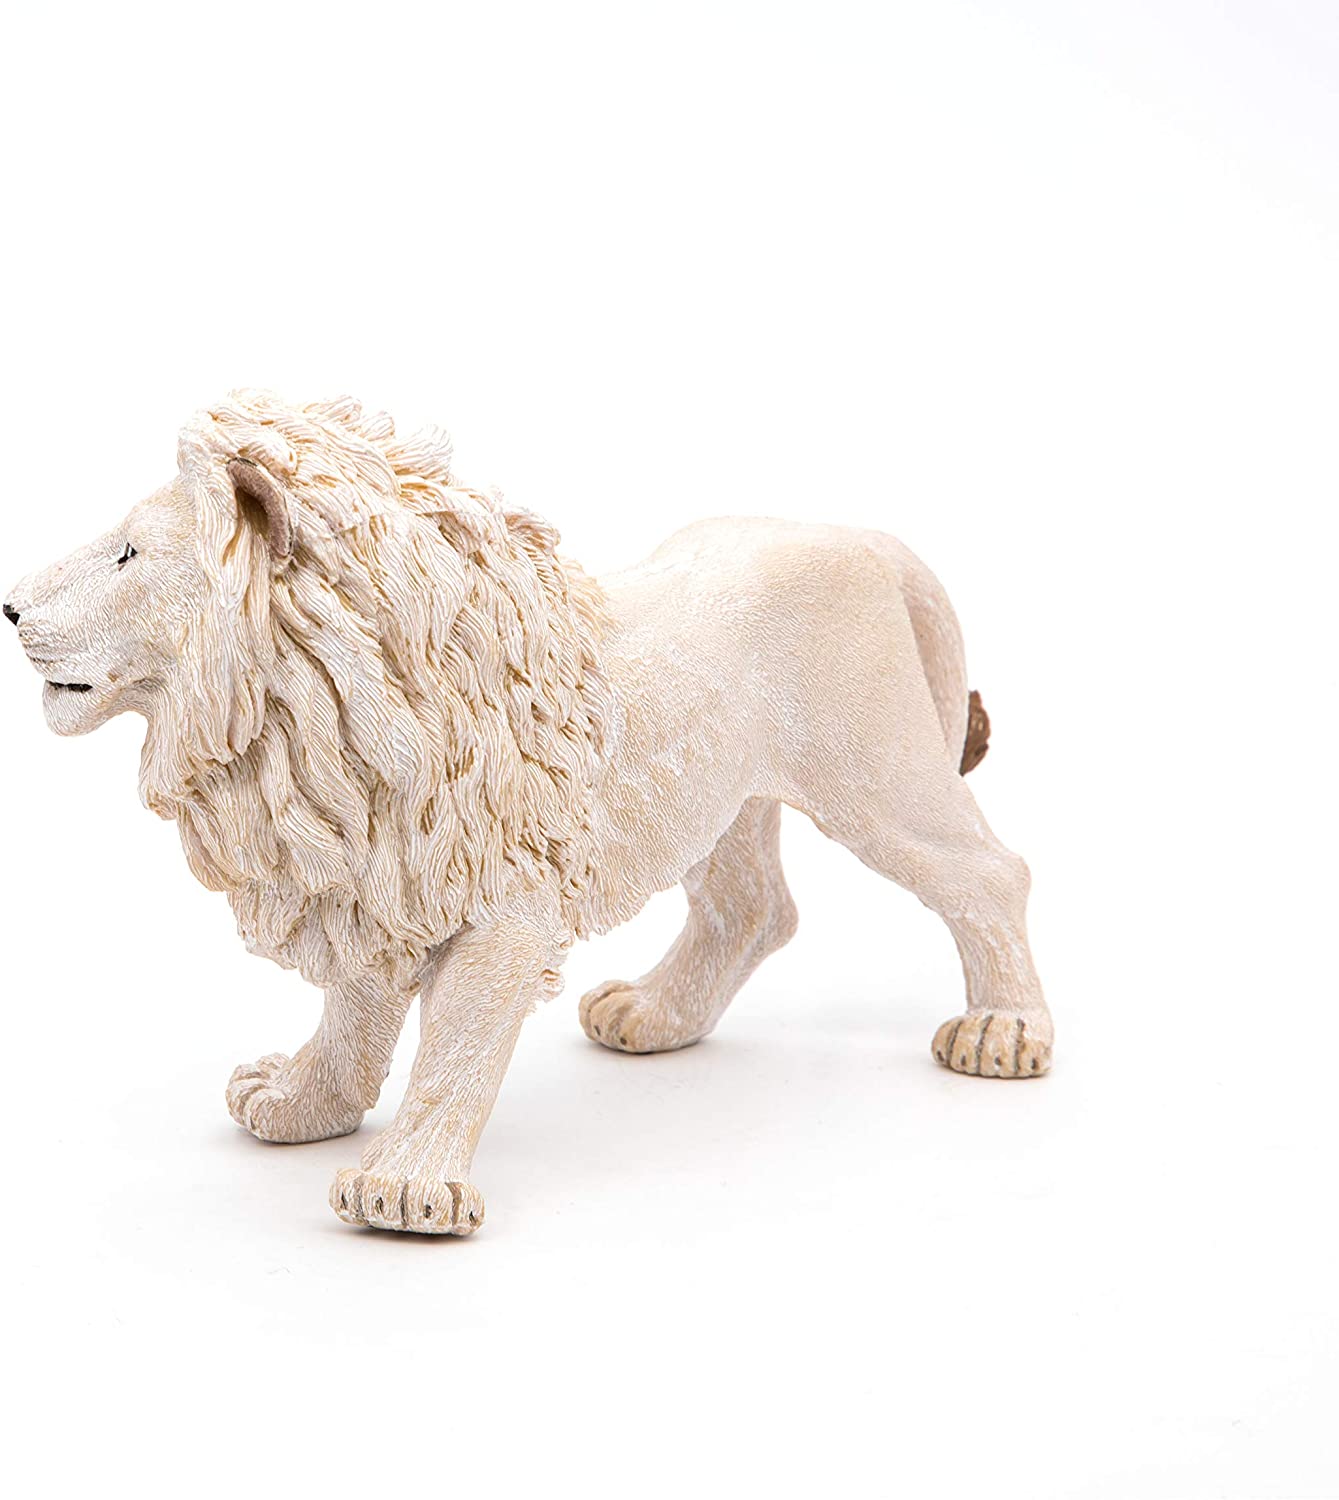 White Lion Figure - A2Z Science & Learning Toy Store